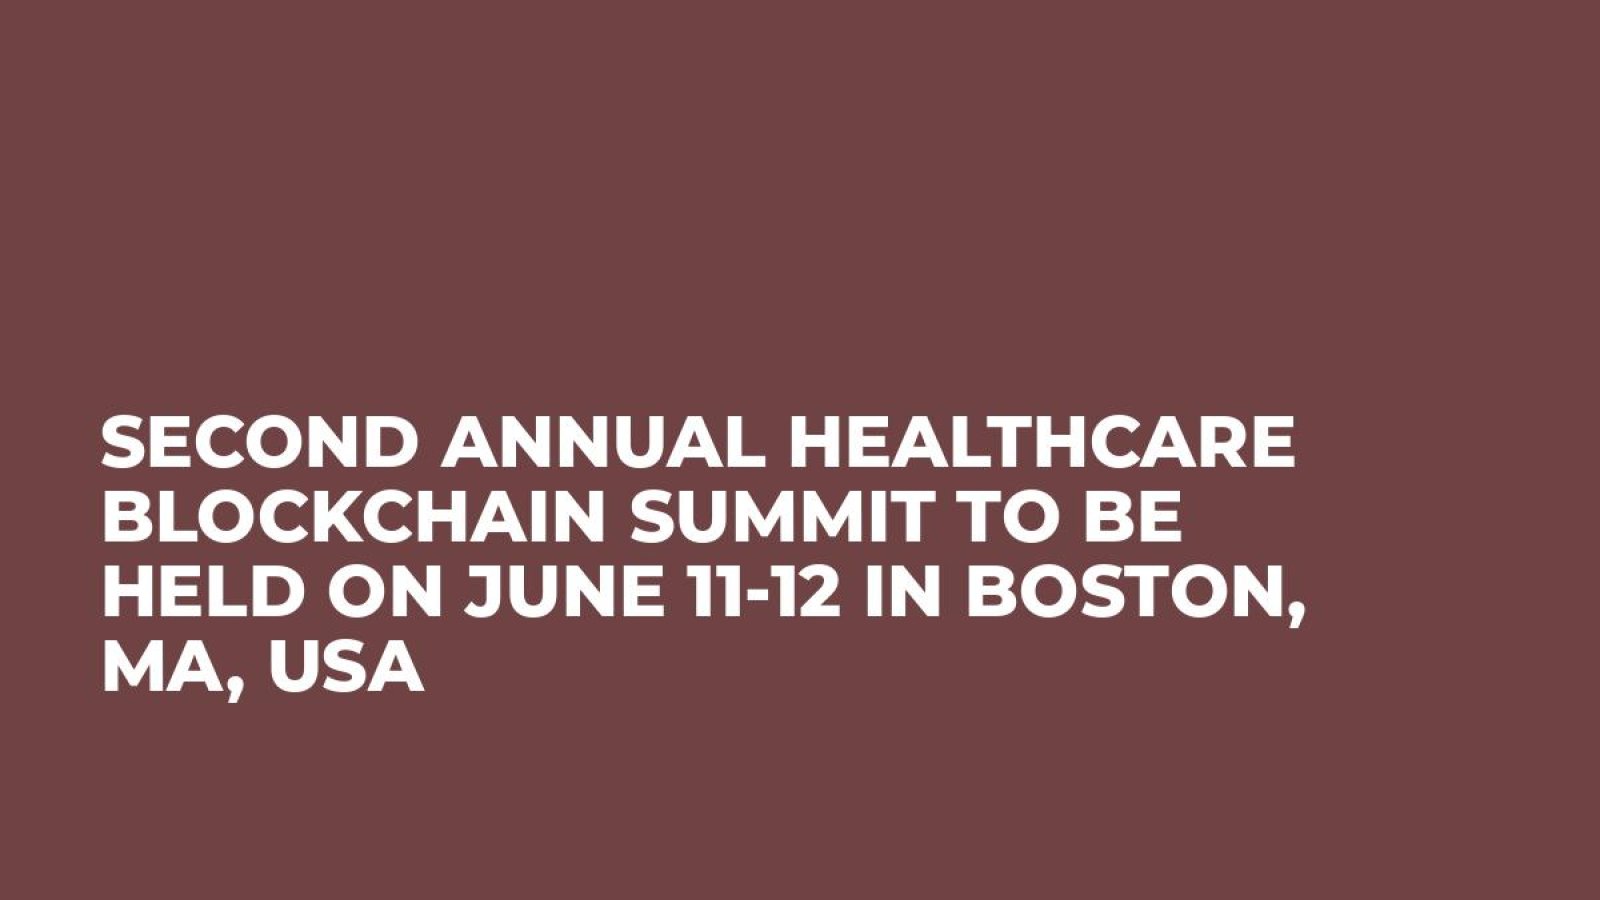 Second Annual Healthcare Blockchain Summit To Be Held on June 11-12 in Boston, MA, USA